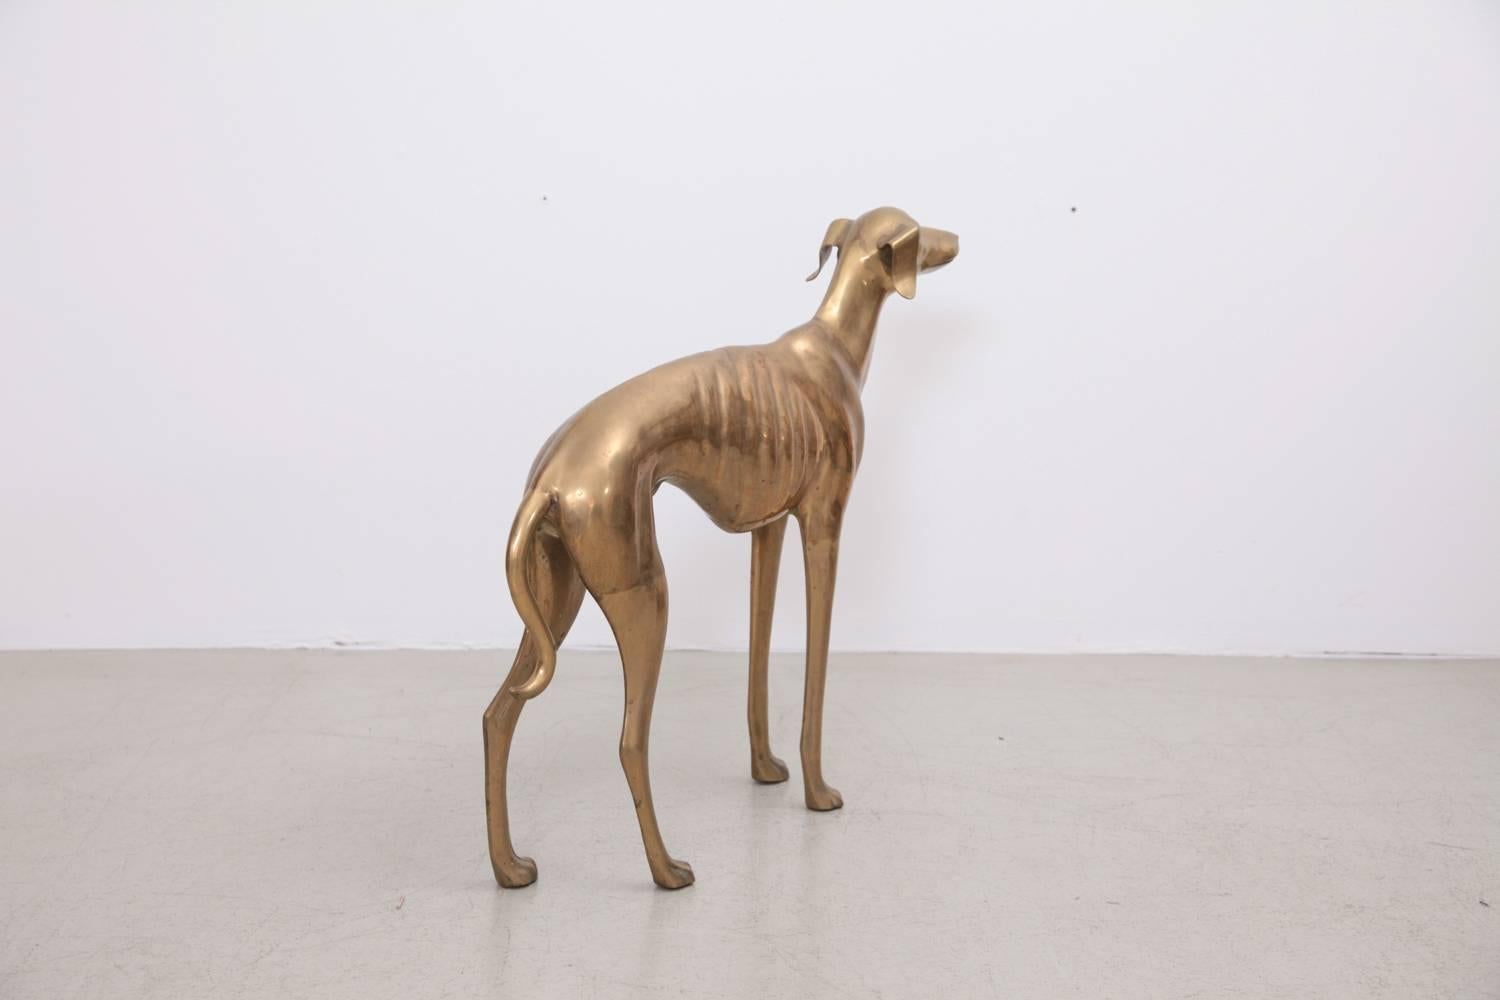 Extraordinary huge dog or greyhound made of brass. It's in very good condition and it brings the Hollywood Regency glamour in every room.

